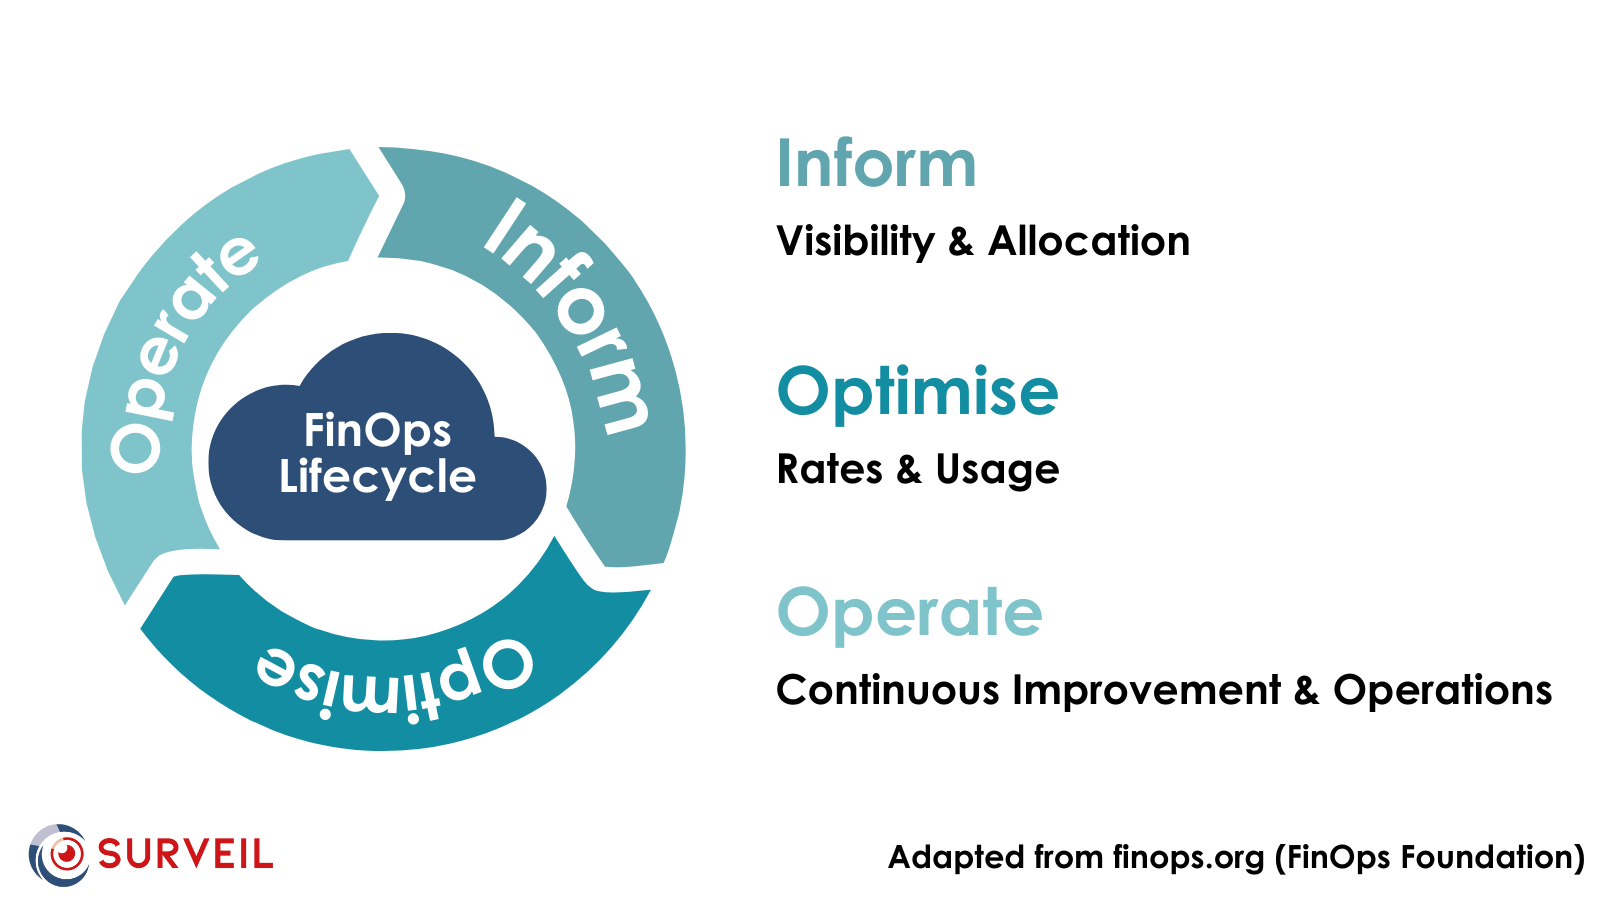 Graphic depicting the FinOps lifecycle, inspired by FinOps Foundation. The graphic is three arrows moving in a circle, depicting the three FinOps stages: inform, optimise, control.